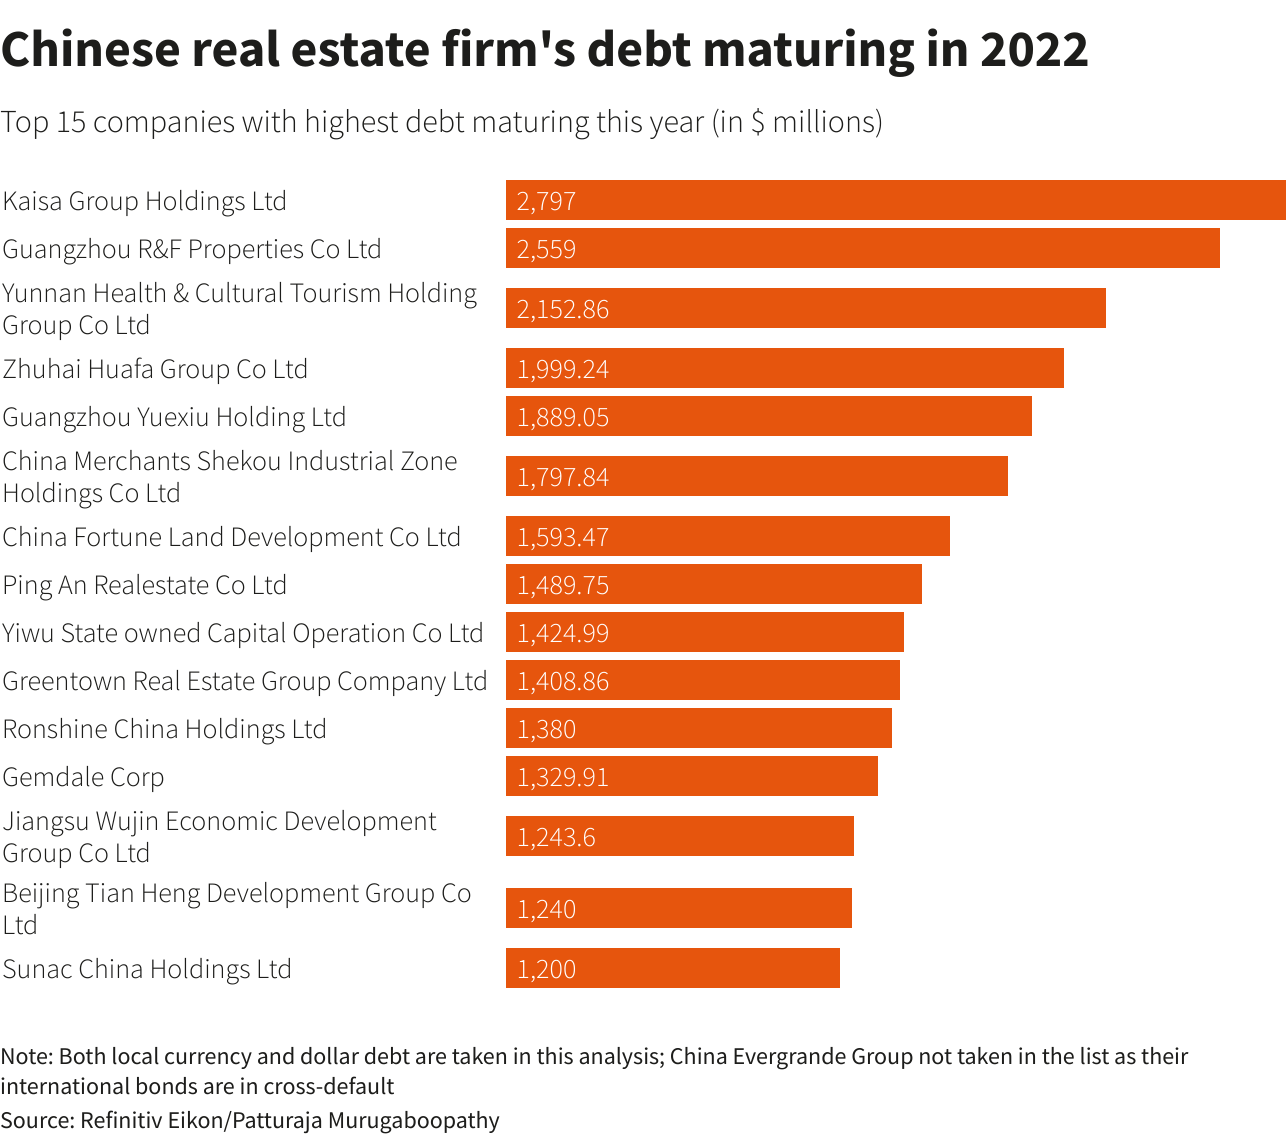 Chinese real estate firm's debt maturing in 2022